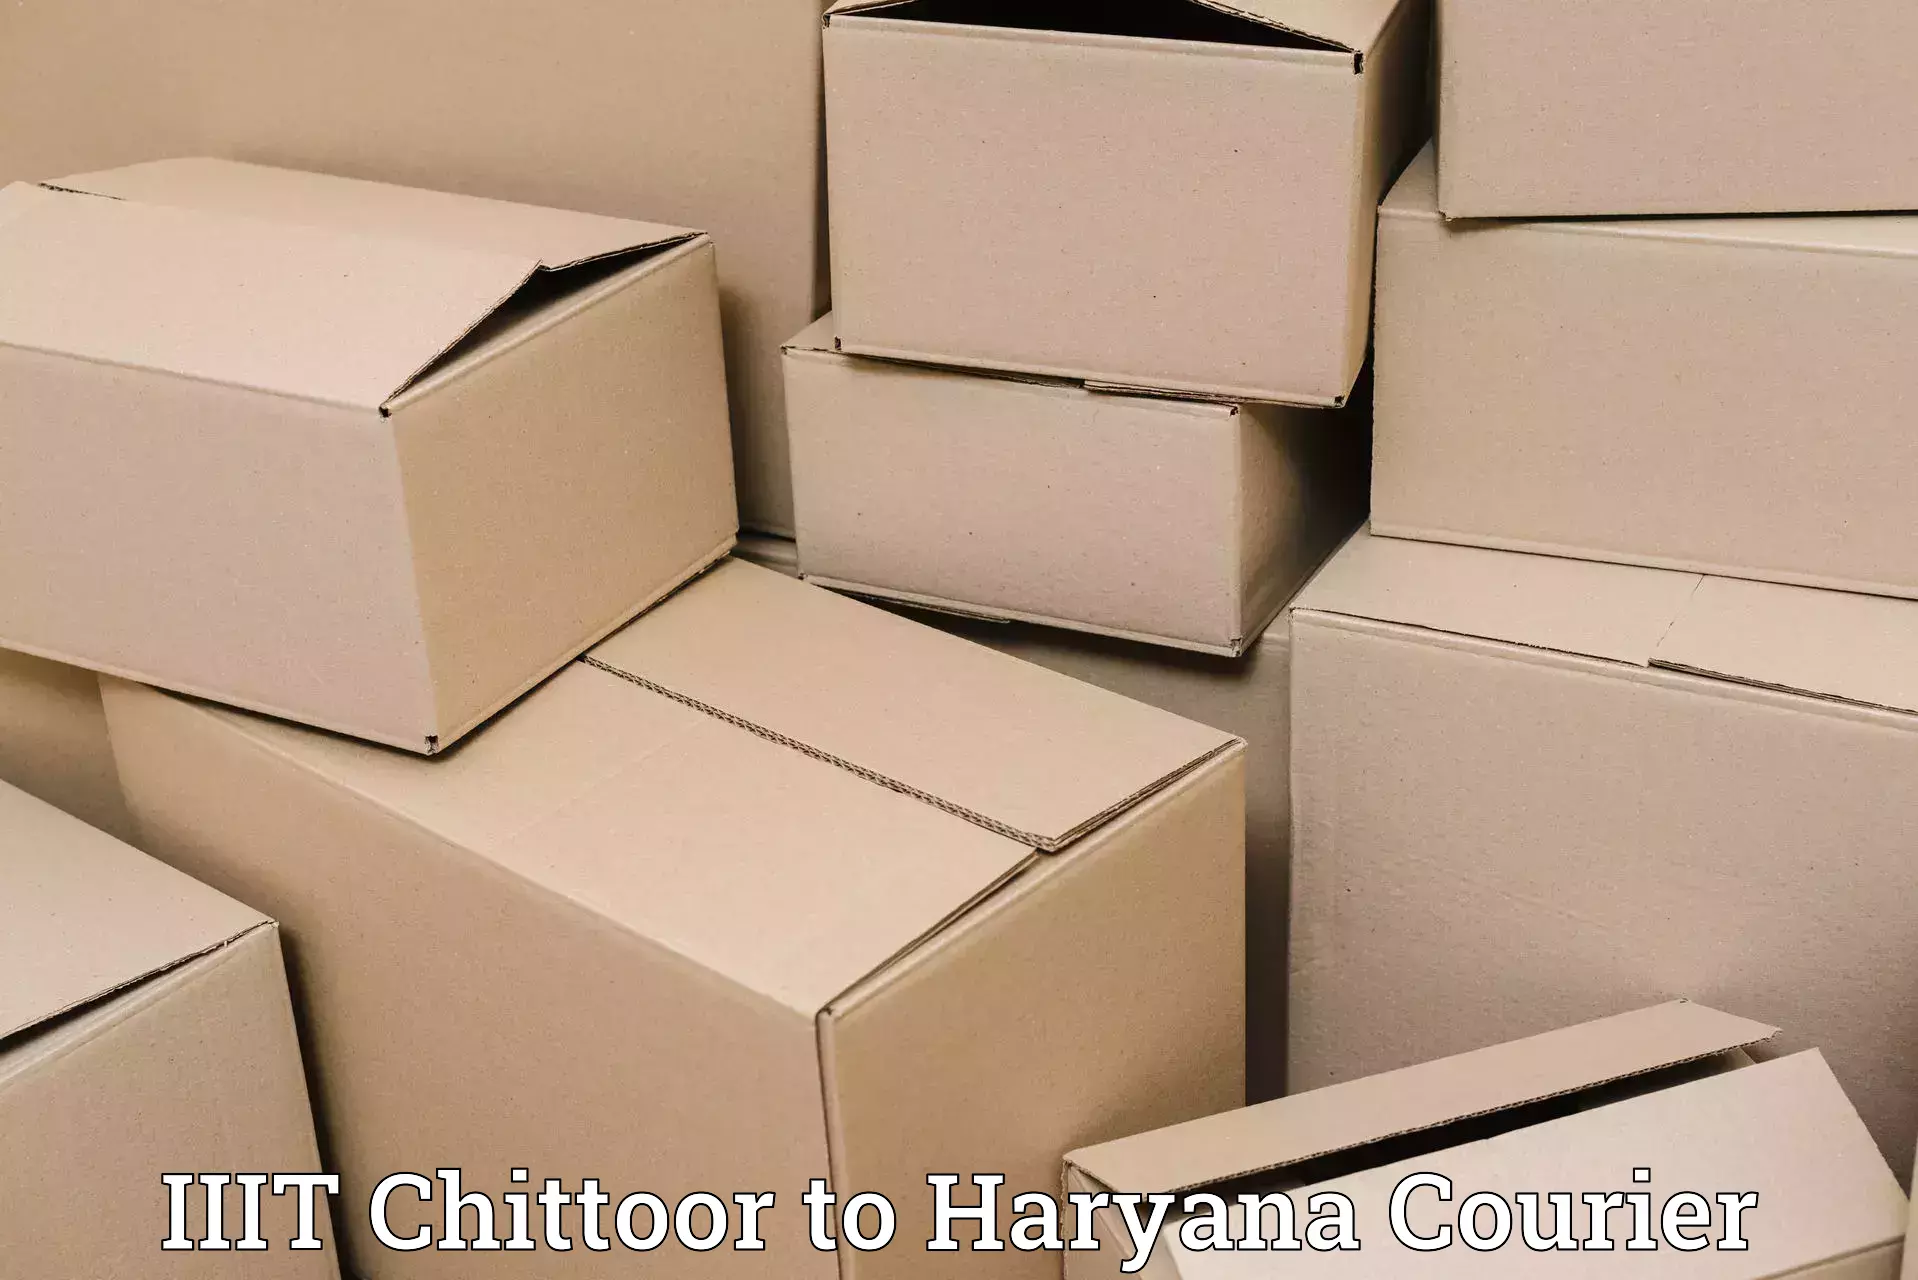 Reliable freight solutions IIIT Chittoor to NCR Haryana